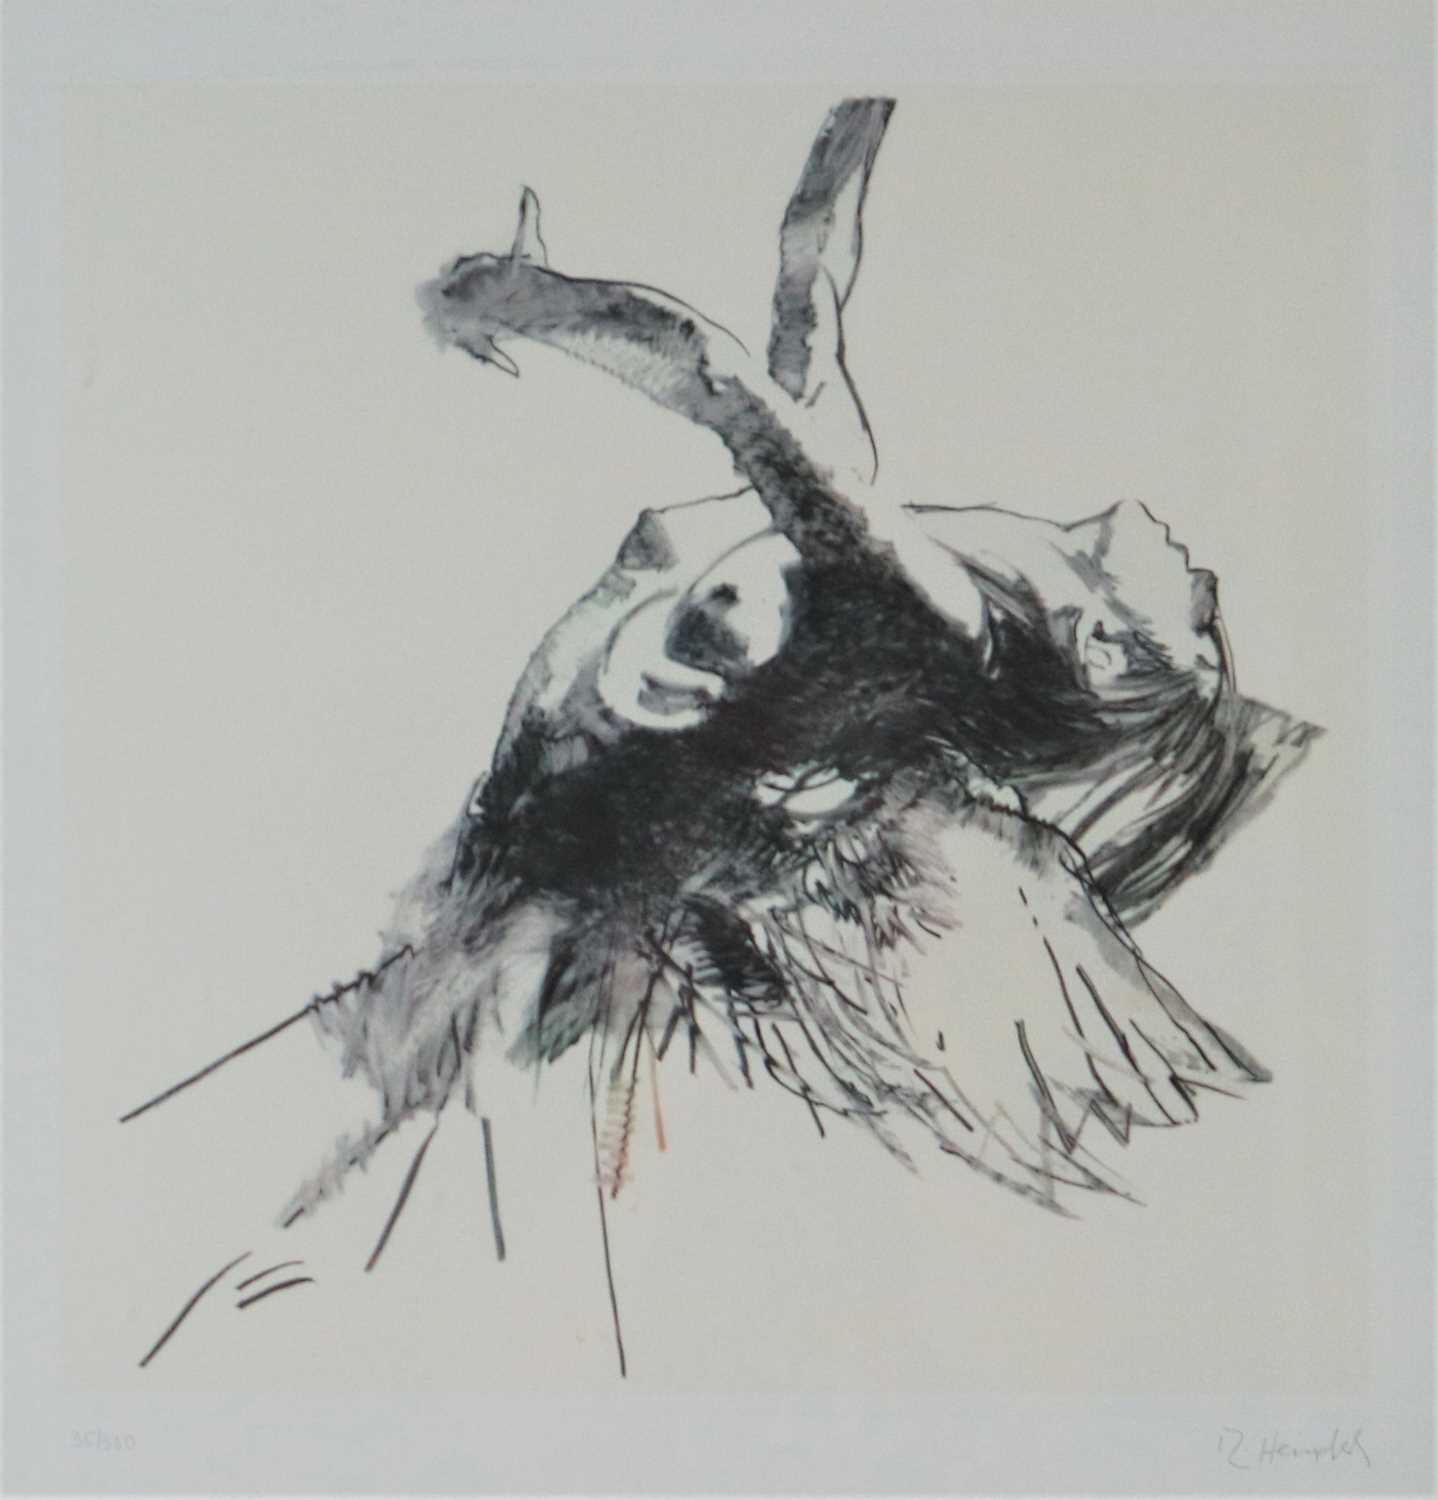 Lot 35 - Robert Heindel (American 20th Century, 1938-2005), Study for Floating Angel No.10